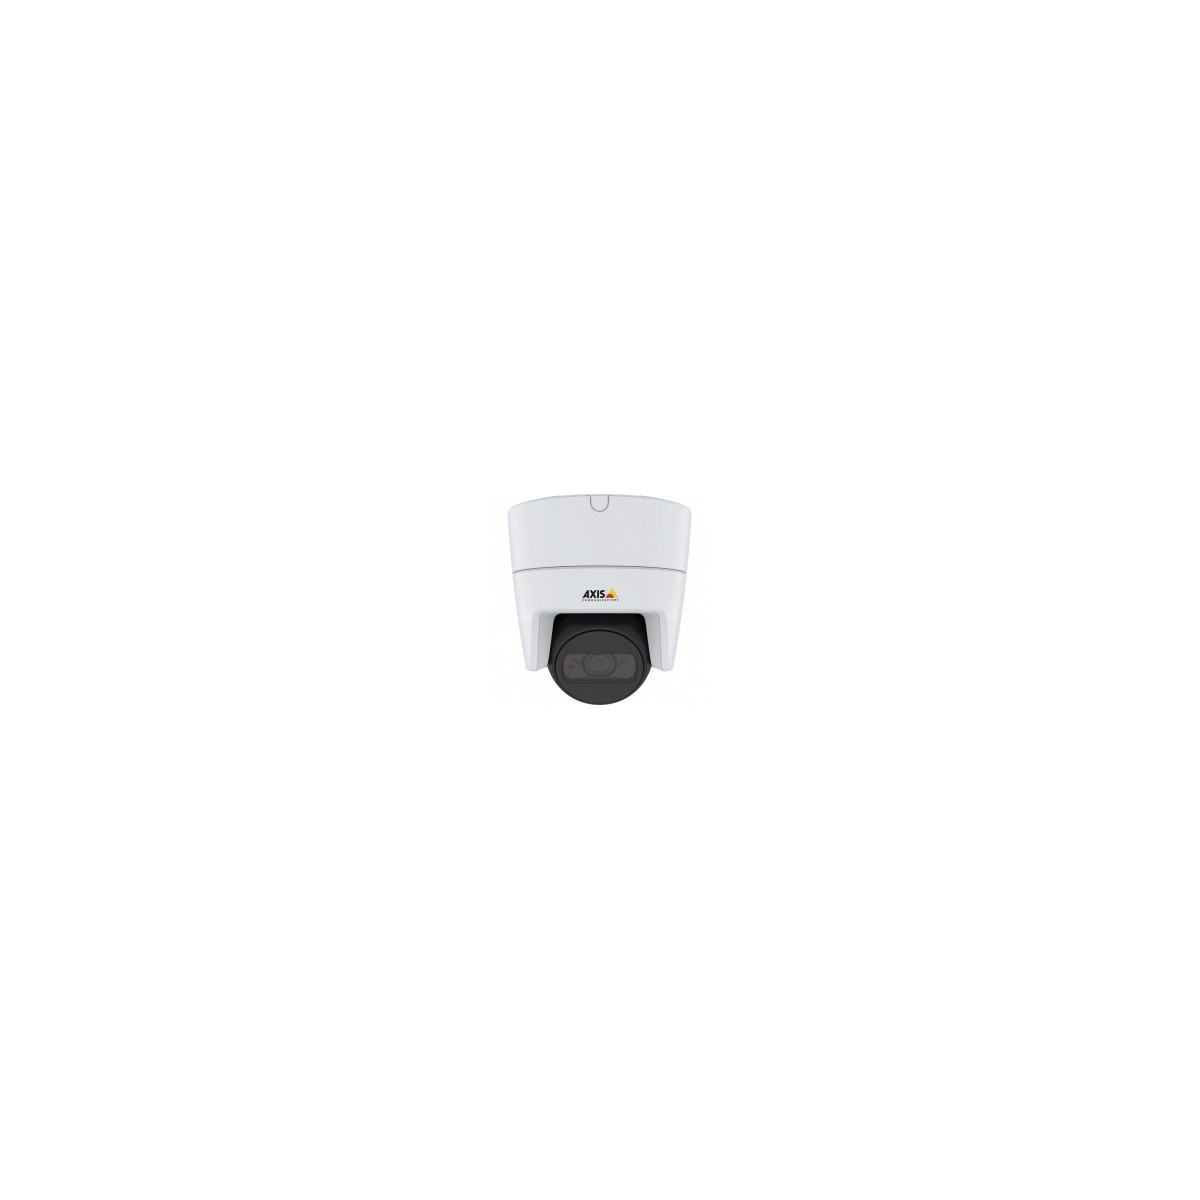 Axis M3115-LVE - IP security camera - Outdoor - Wired - Simplified Chinese - Traditional Chinese - German - English - Spanish - 